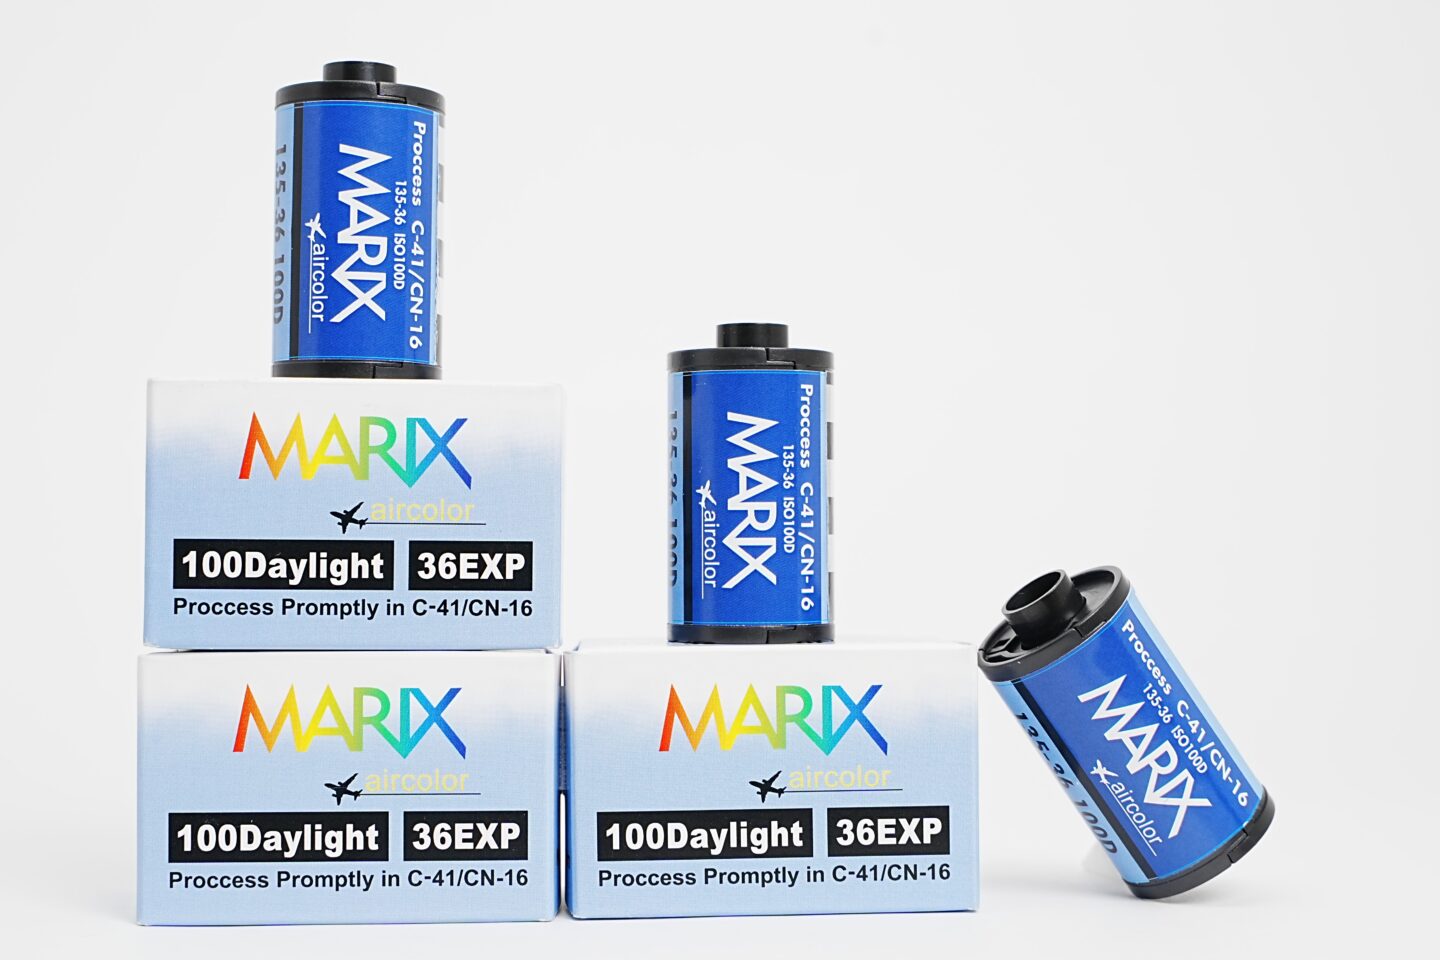 MARIX's new color negative film "MARIX aircolor 100". The company president talks about the manufacturing secrets and the three features that will make you want to use it again once you use it.